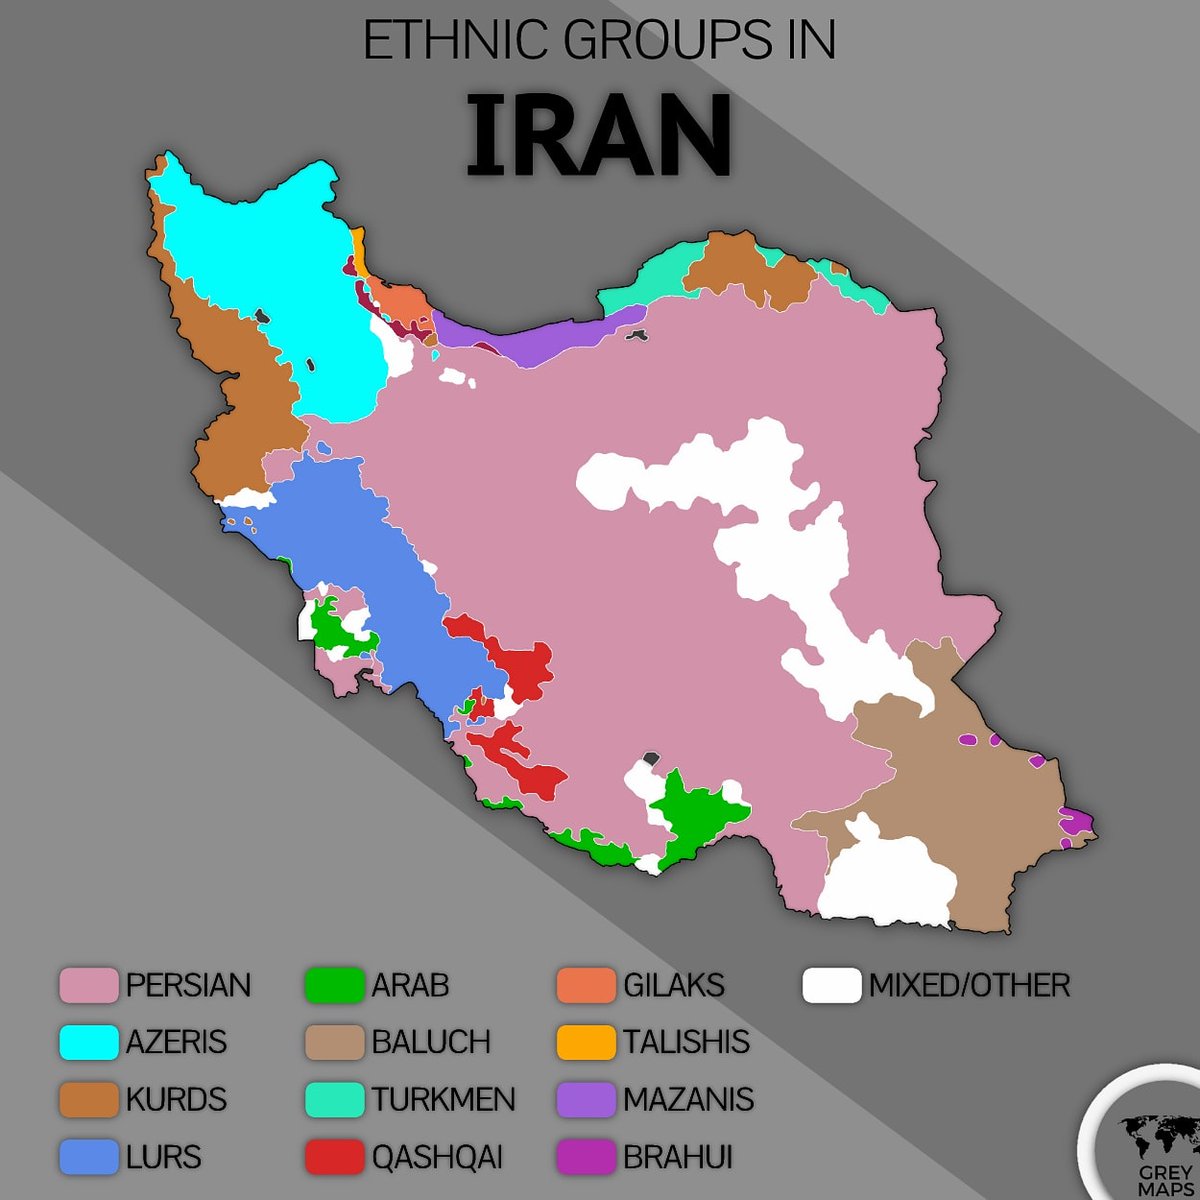 After the recent decline of Persians in Iran, they are now once again the largest ethnic group at around 60% followed by Azeri Turks at around 20% then Kurds. The Islamic occupiers have also failed to divide each region. All Iranians are more united than ever against Islamism.